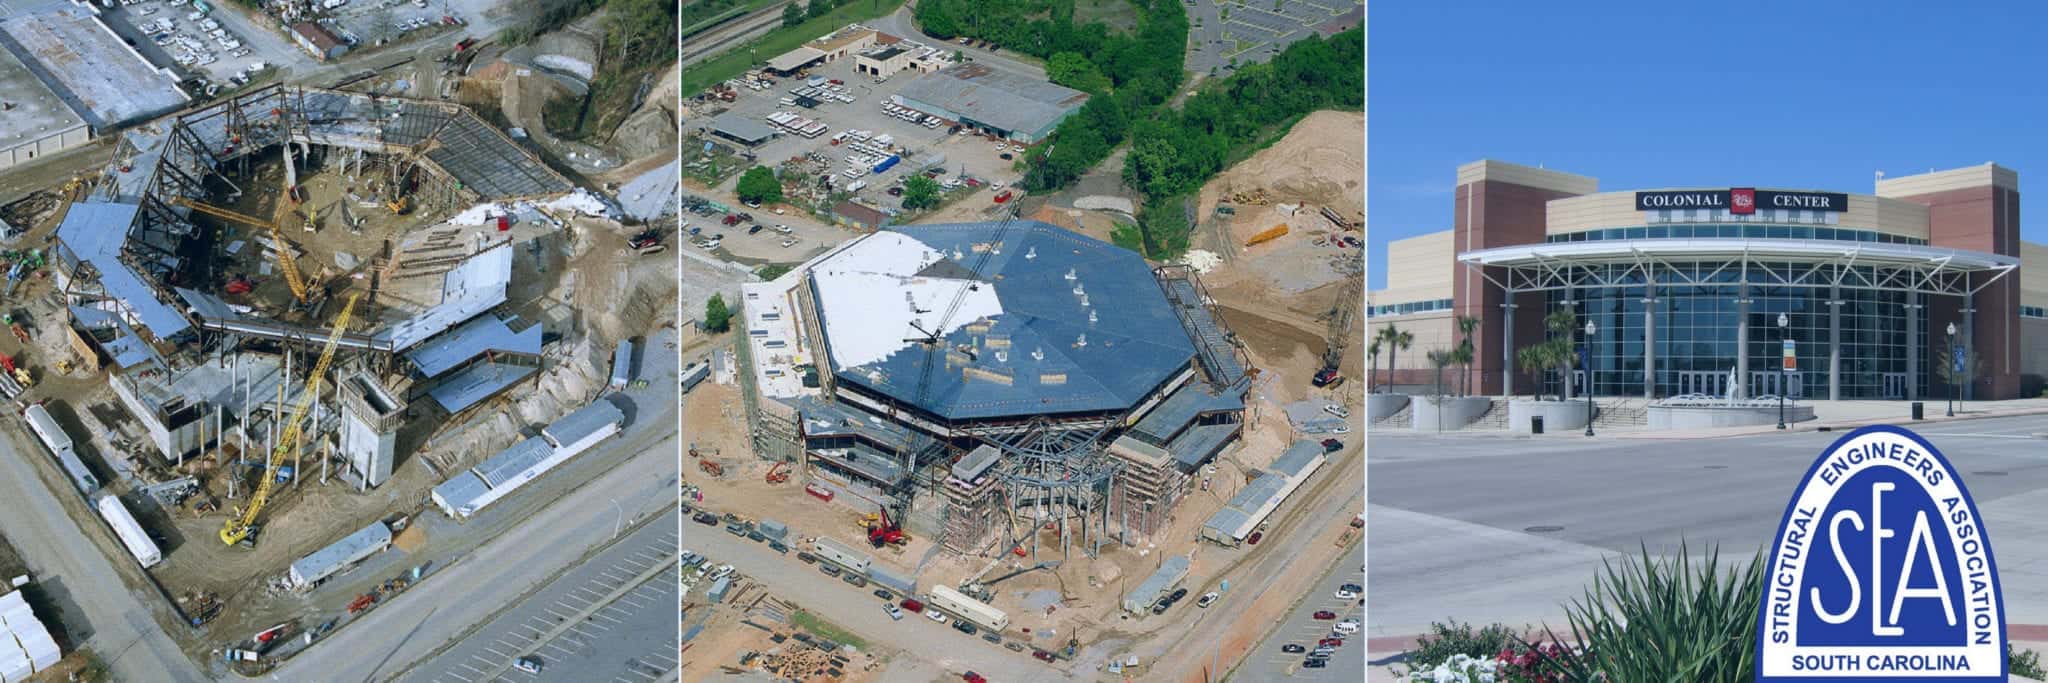 SEASC helped build the Colonial Life Arena here in Columbia SC